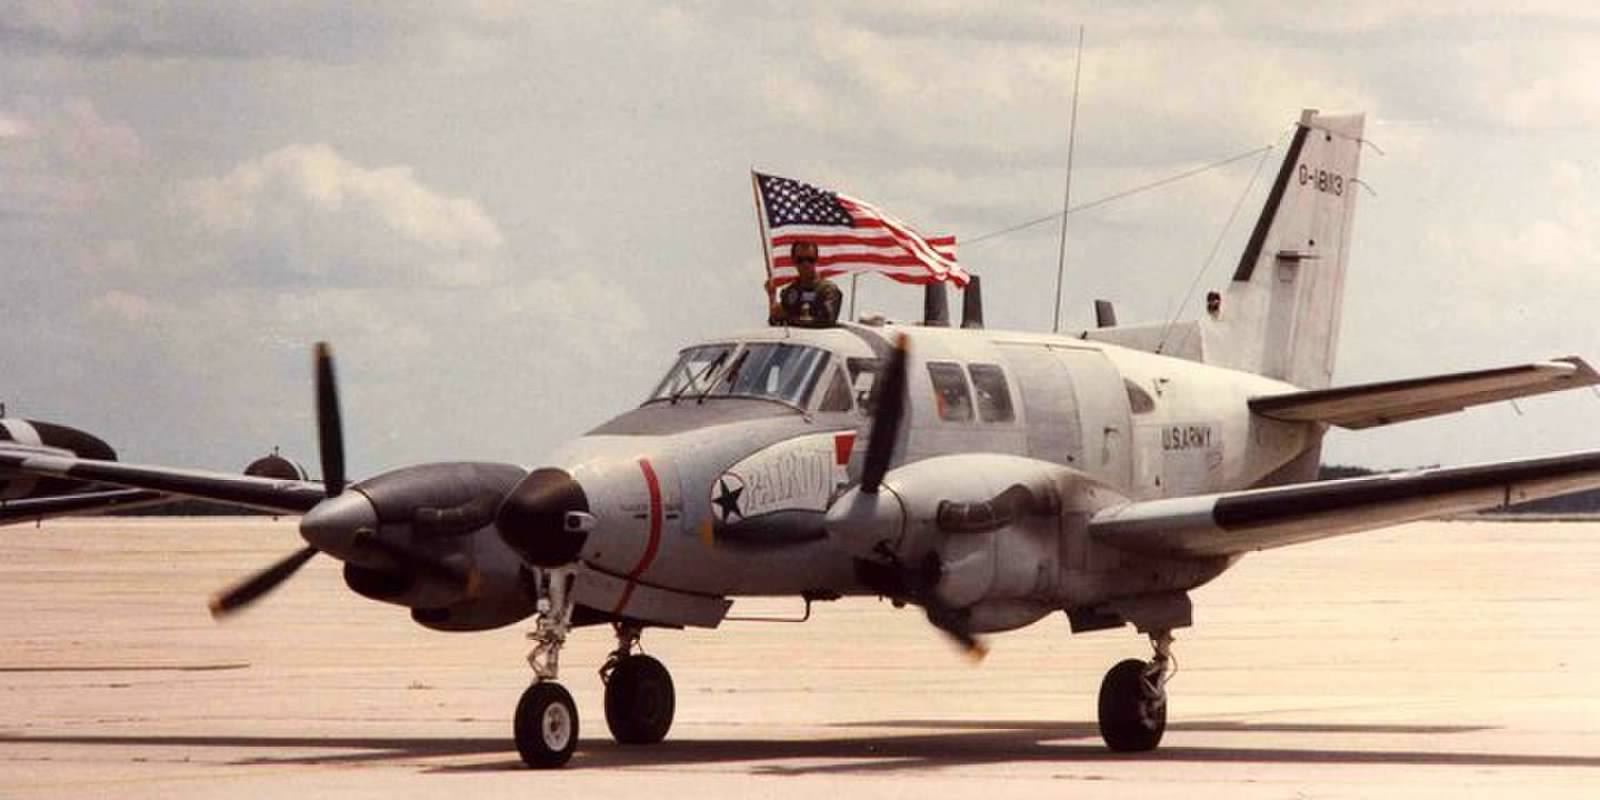 RU-21A 67-18113 as she arrived home in Orlando from the Middle East following her role in the first Gulf War. This is the aircraft which the Memorial has acquired for display. (photo via 138th Aviation Company Memorial)